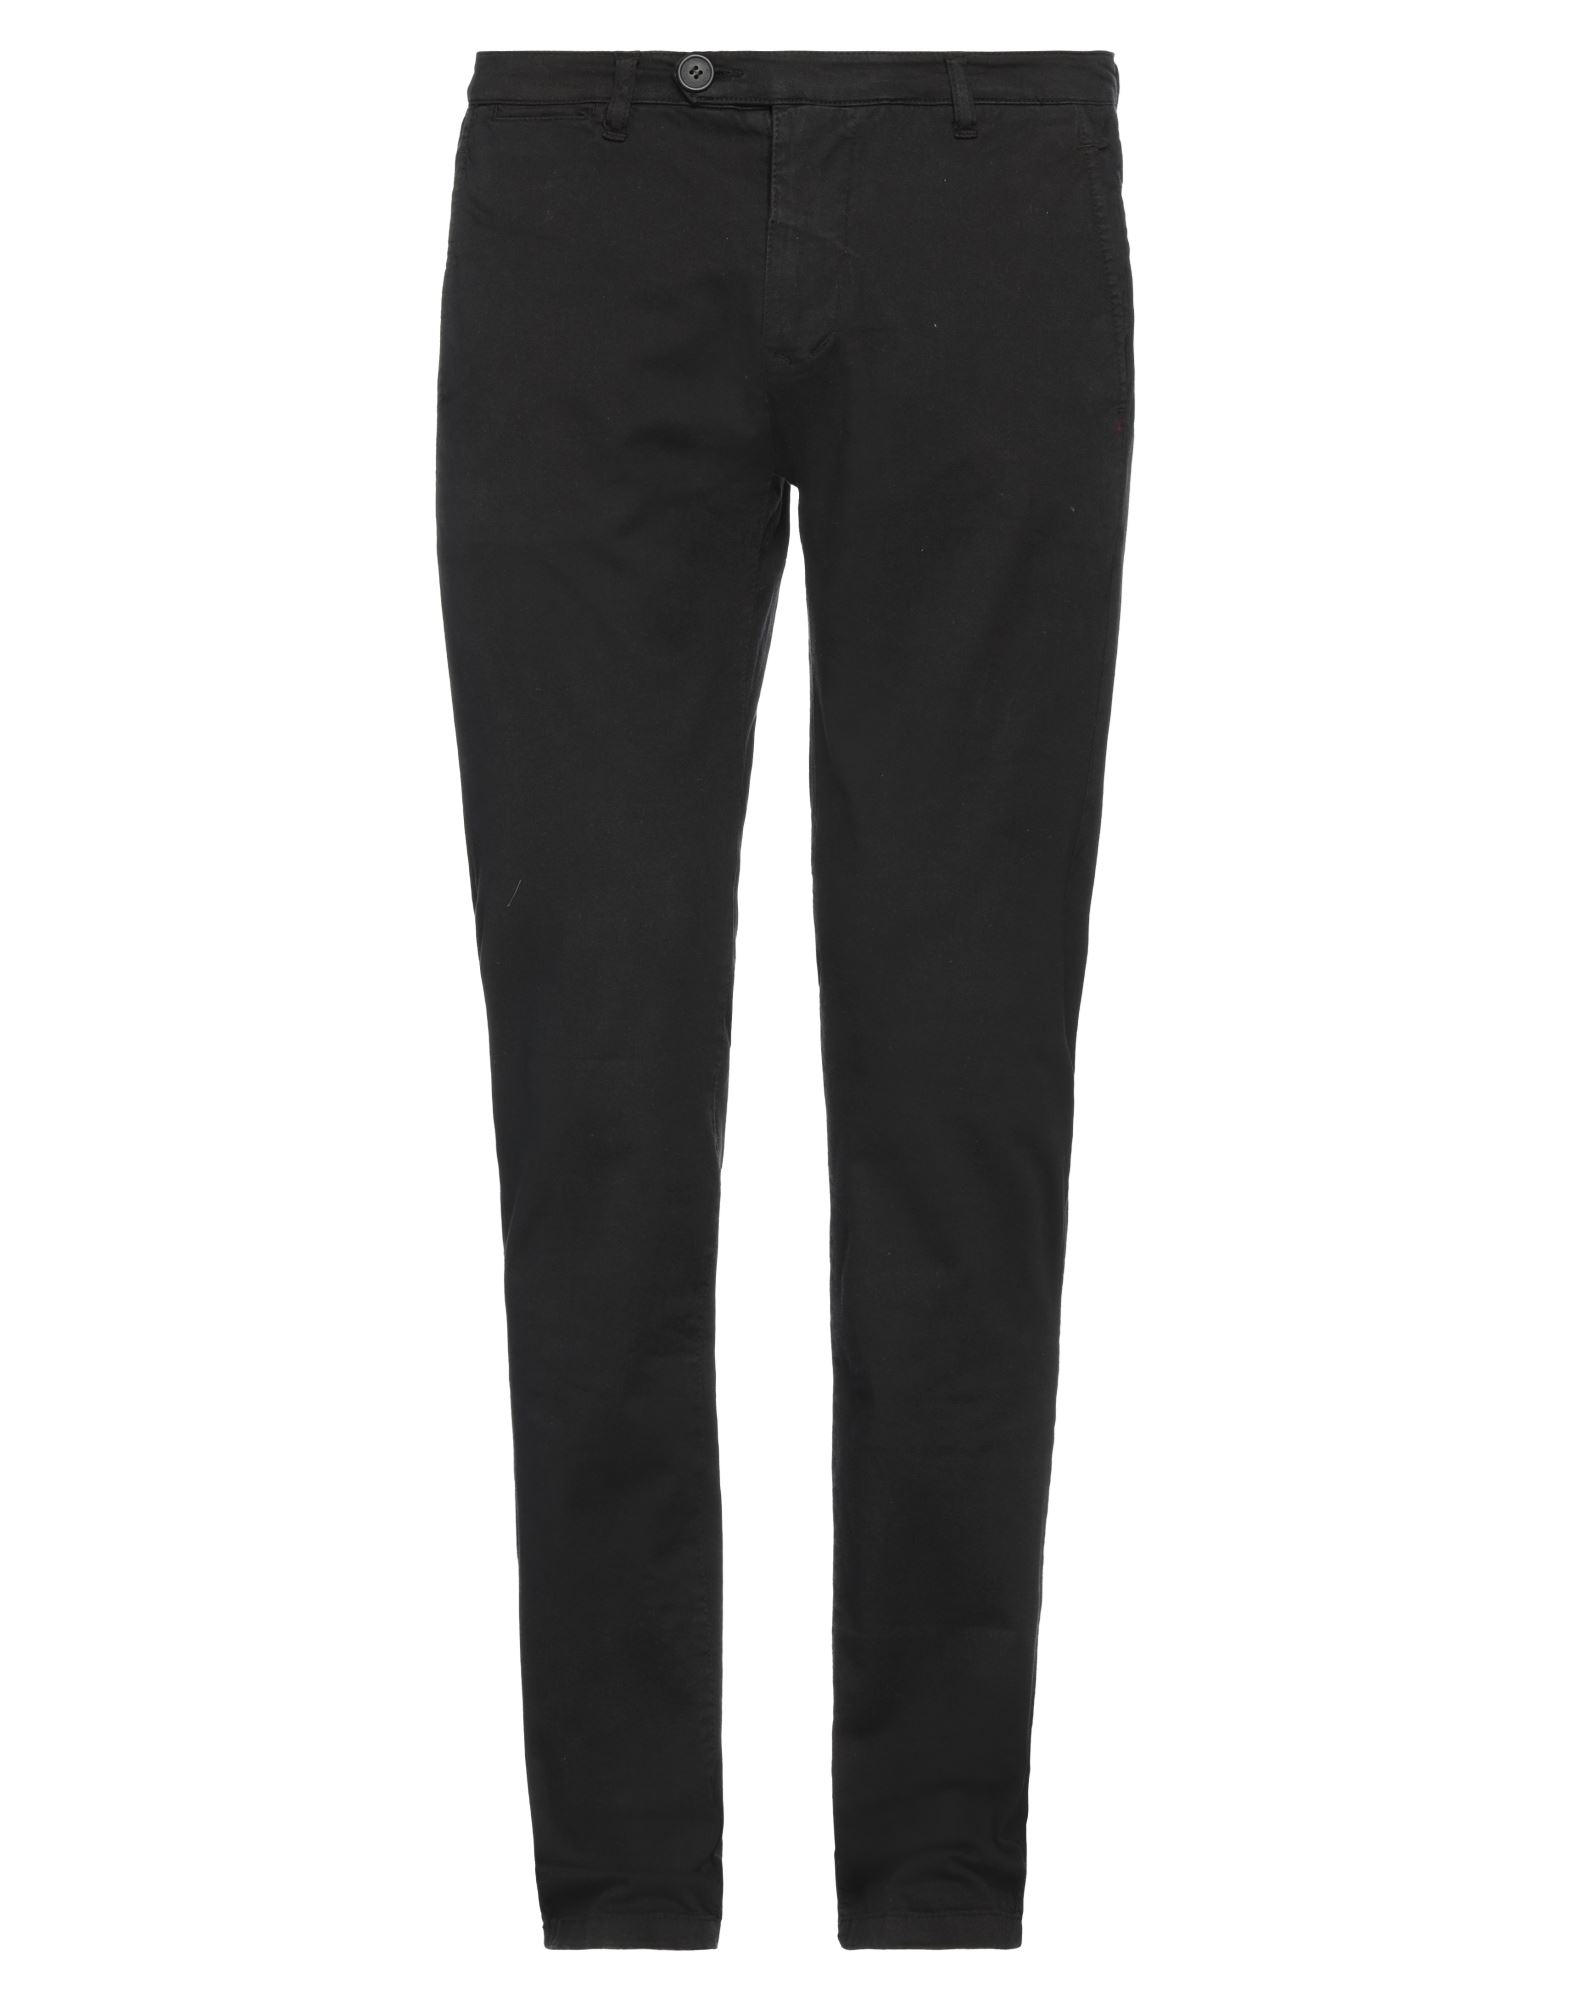 Happiness Pants In Black